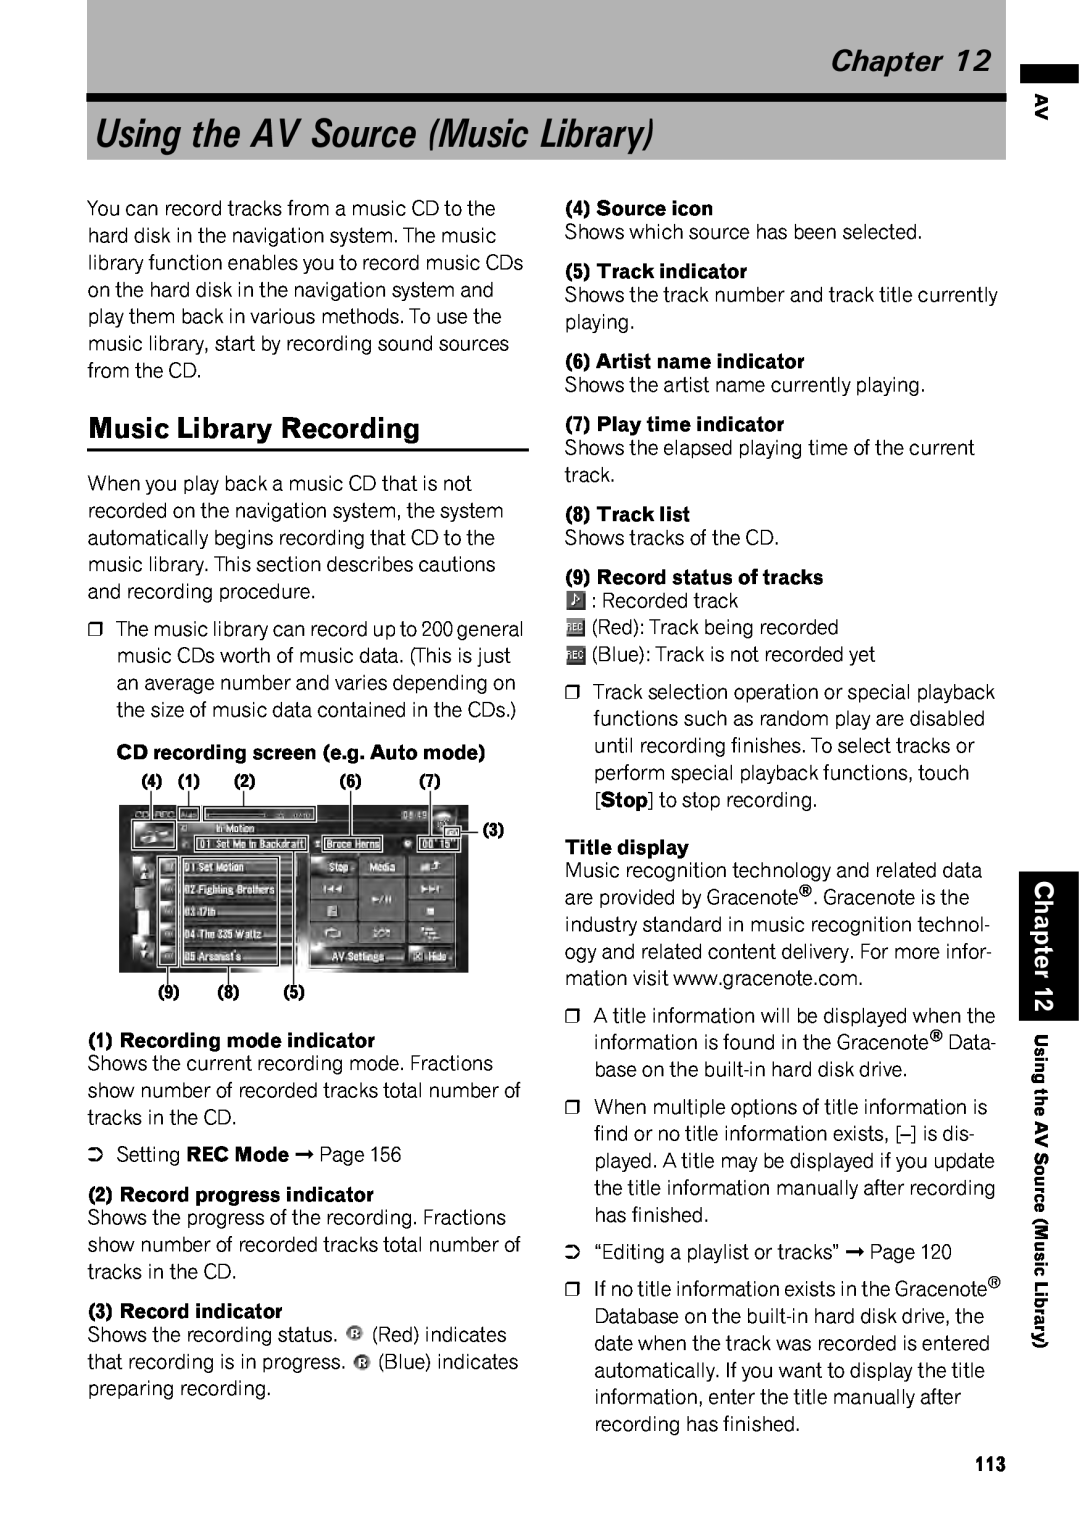 Pioneer AVIC-Z1 operation manual Using the AV Source Music Library, Music Library Recording, Chapter 